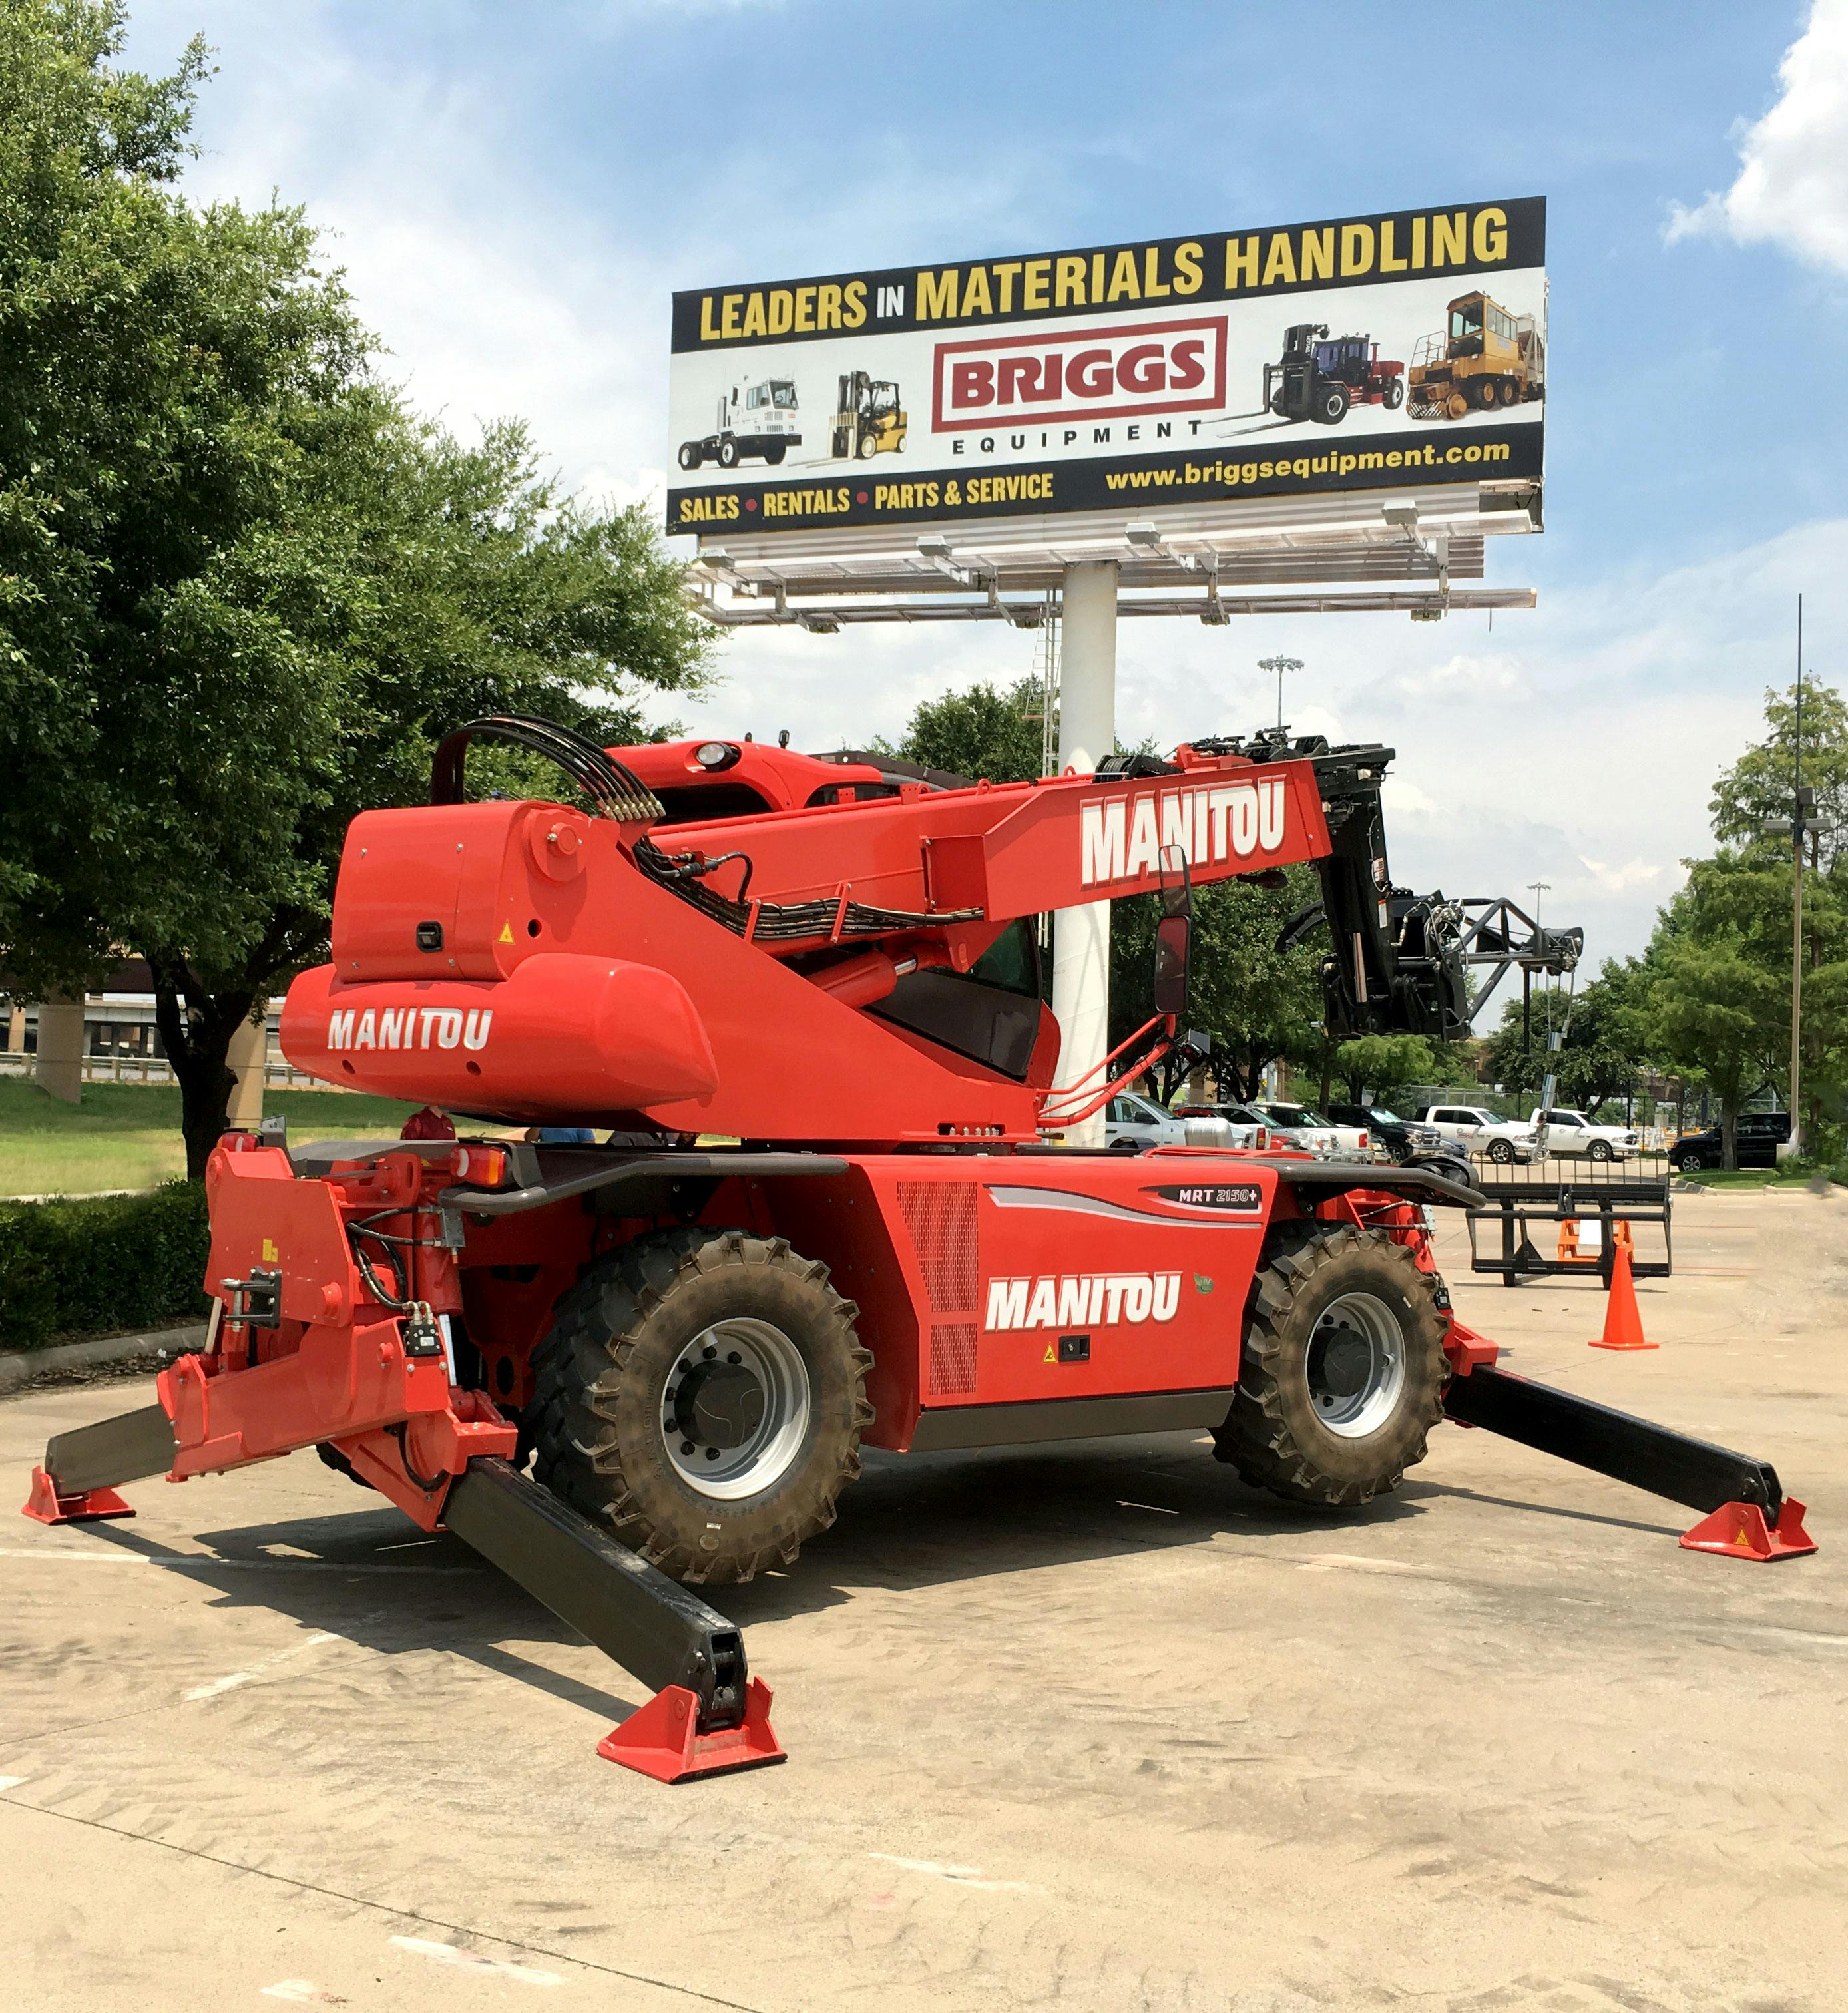 Manitou Adds Briggs to Dealer Network | Construction News